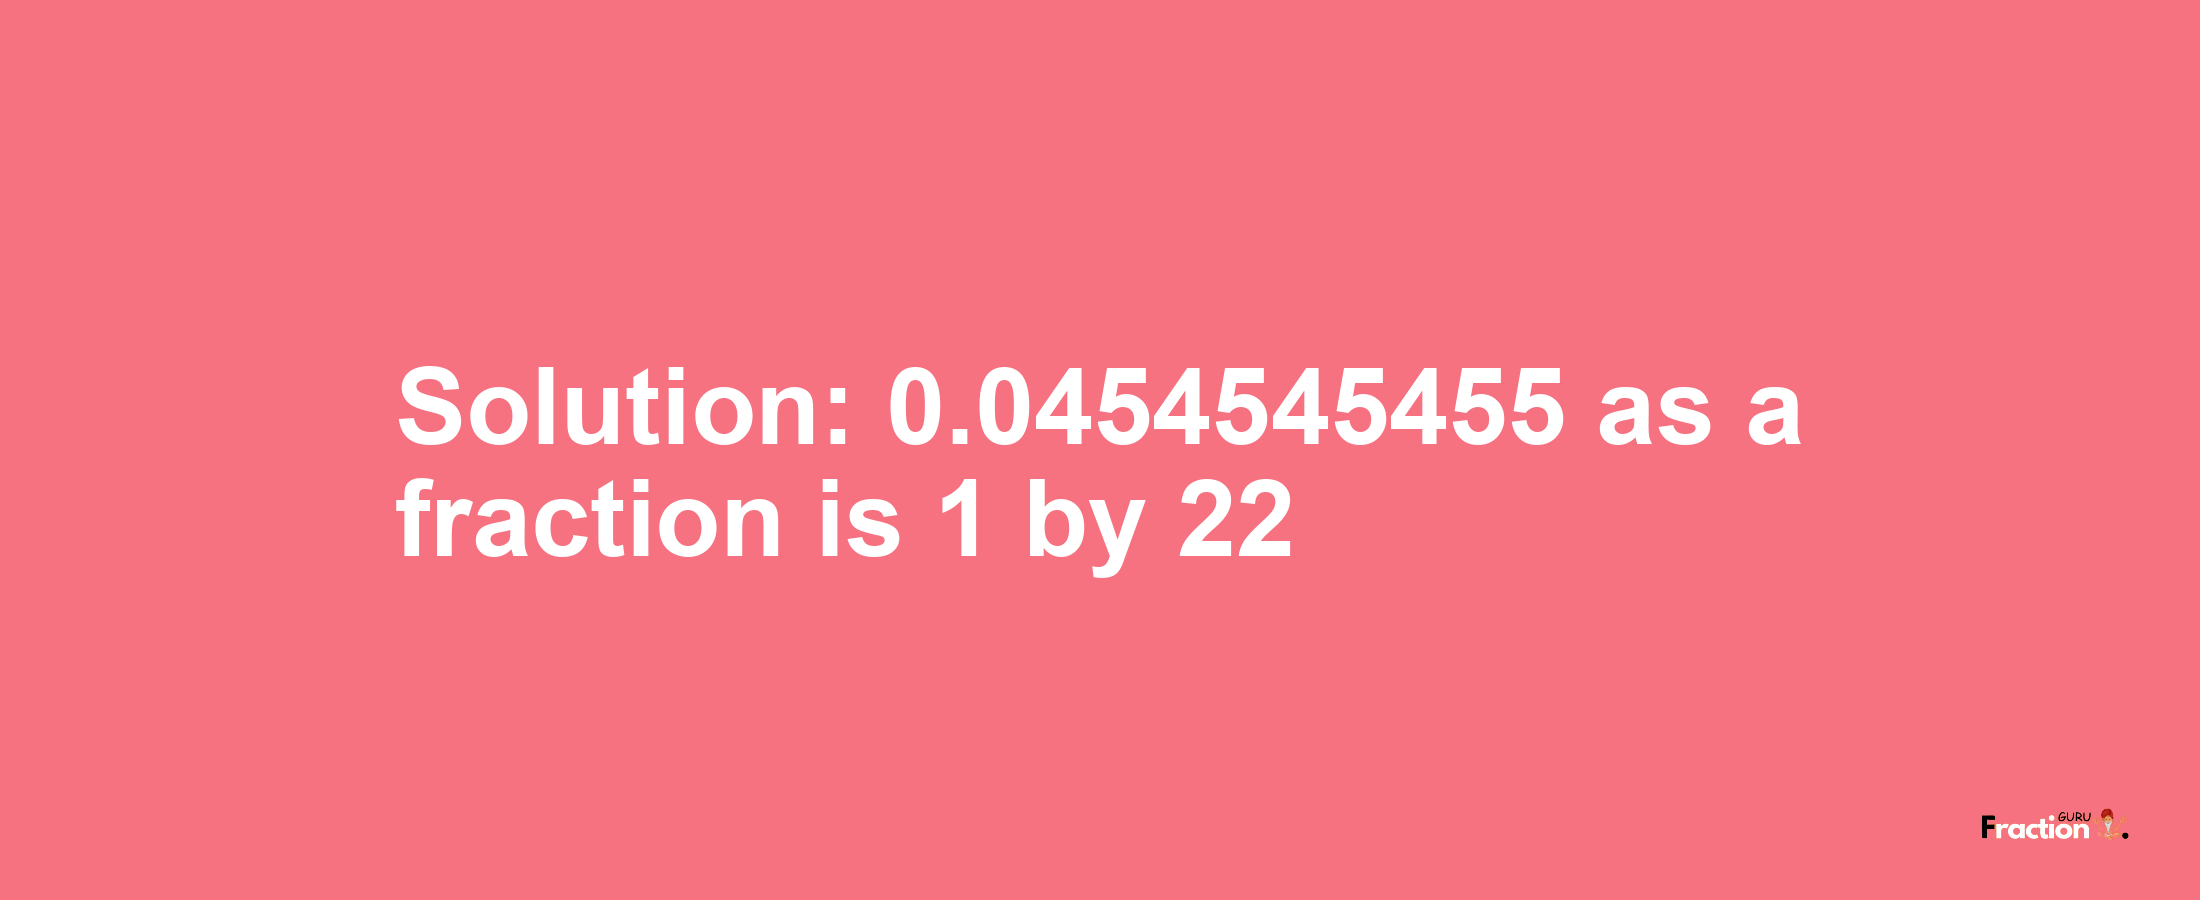 Solution:0.0454545455 as a fraction is 1/22